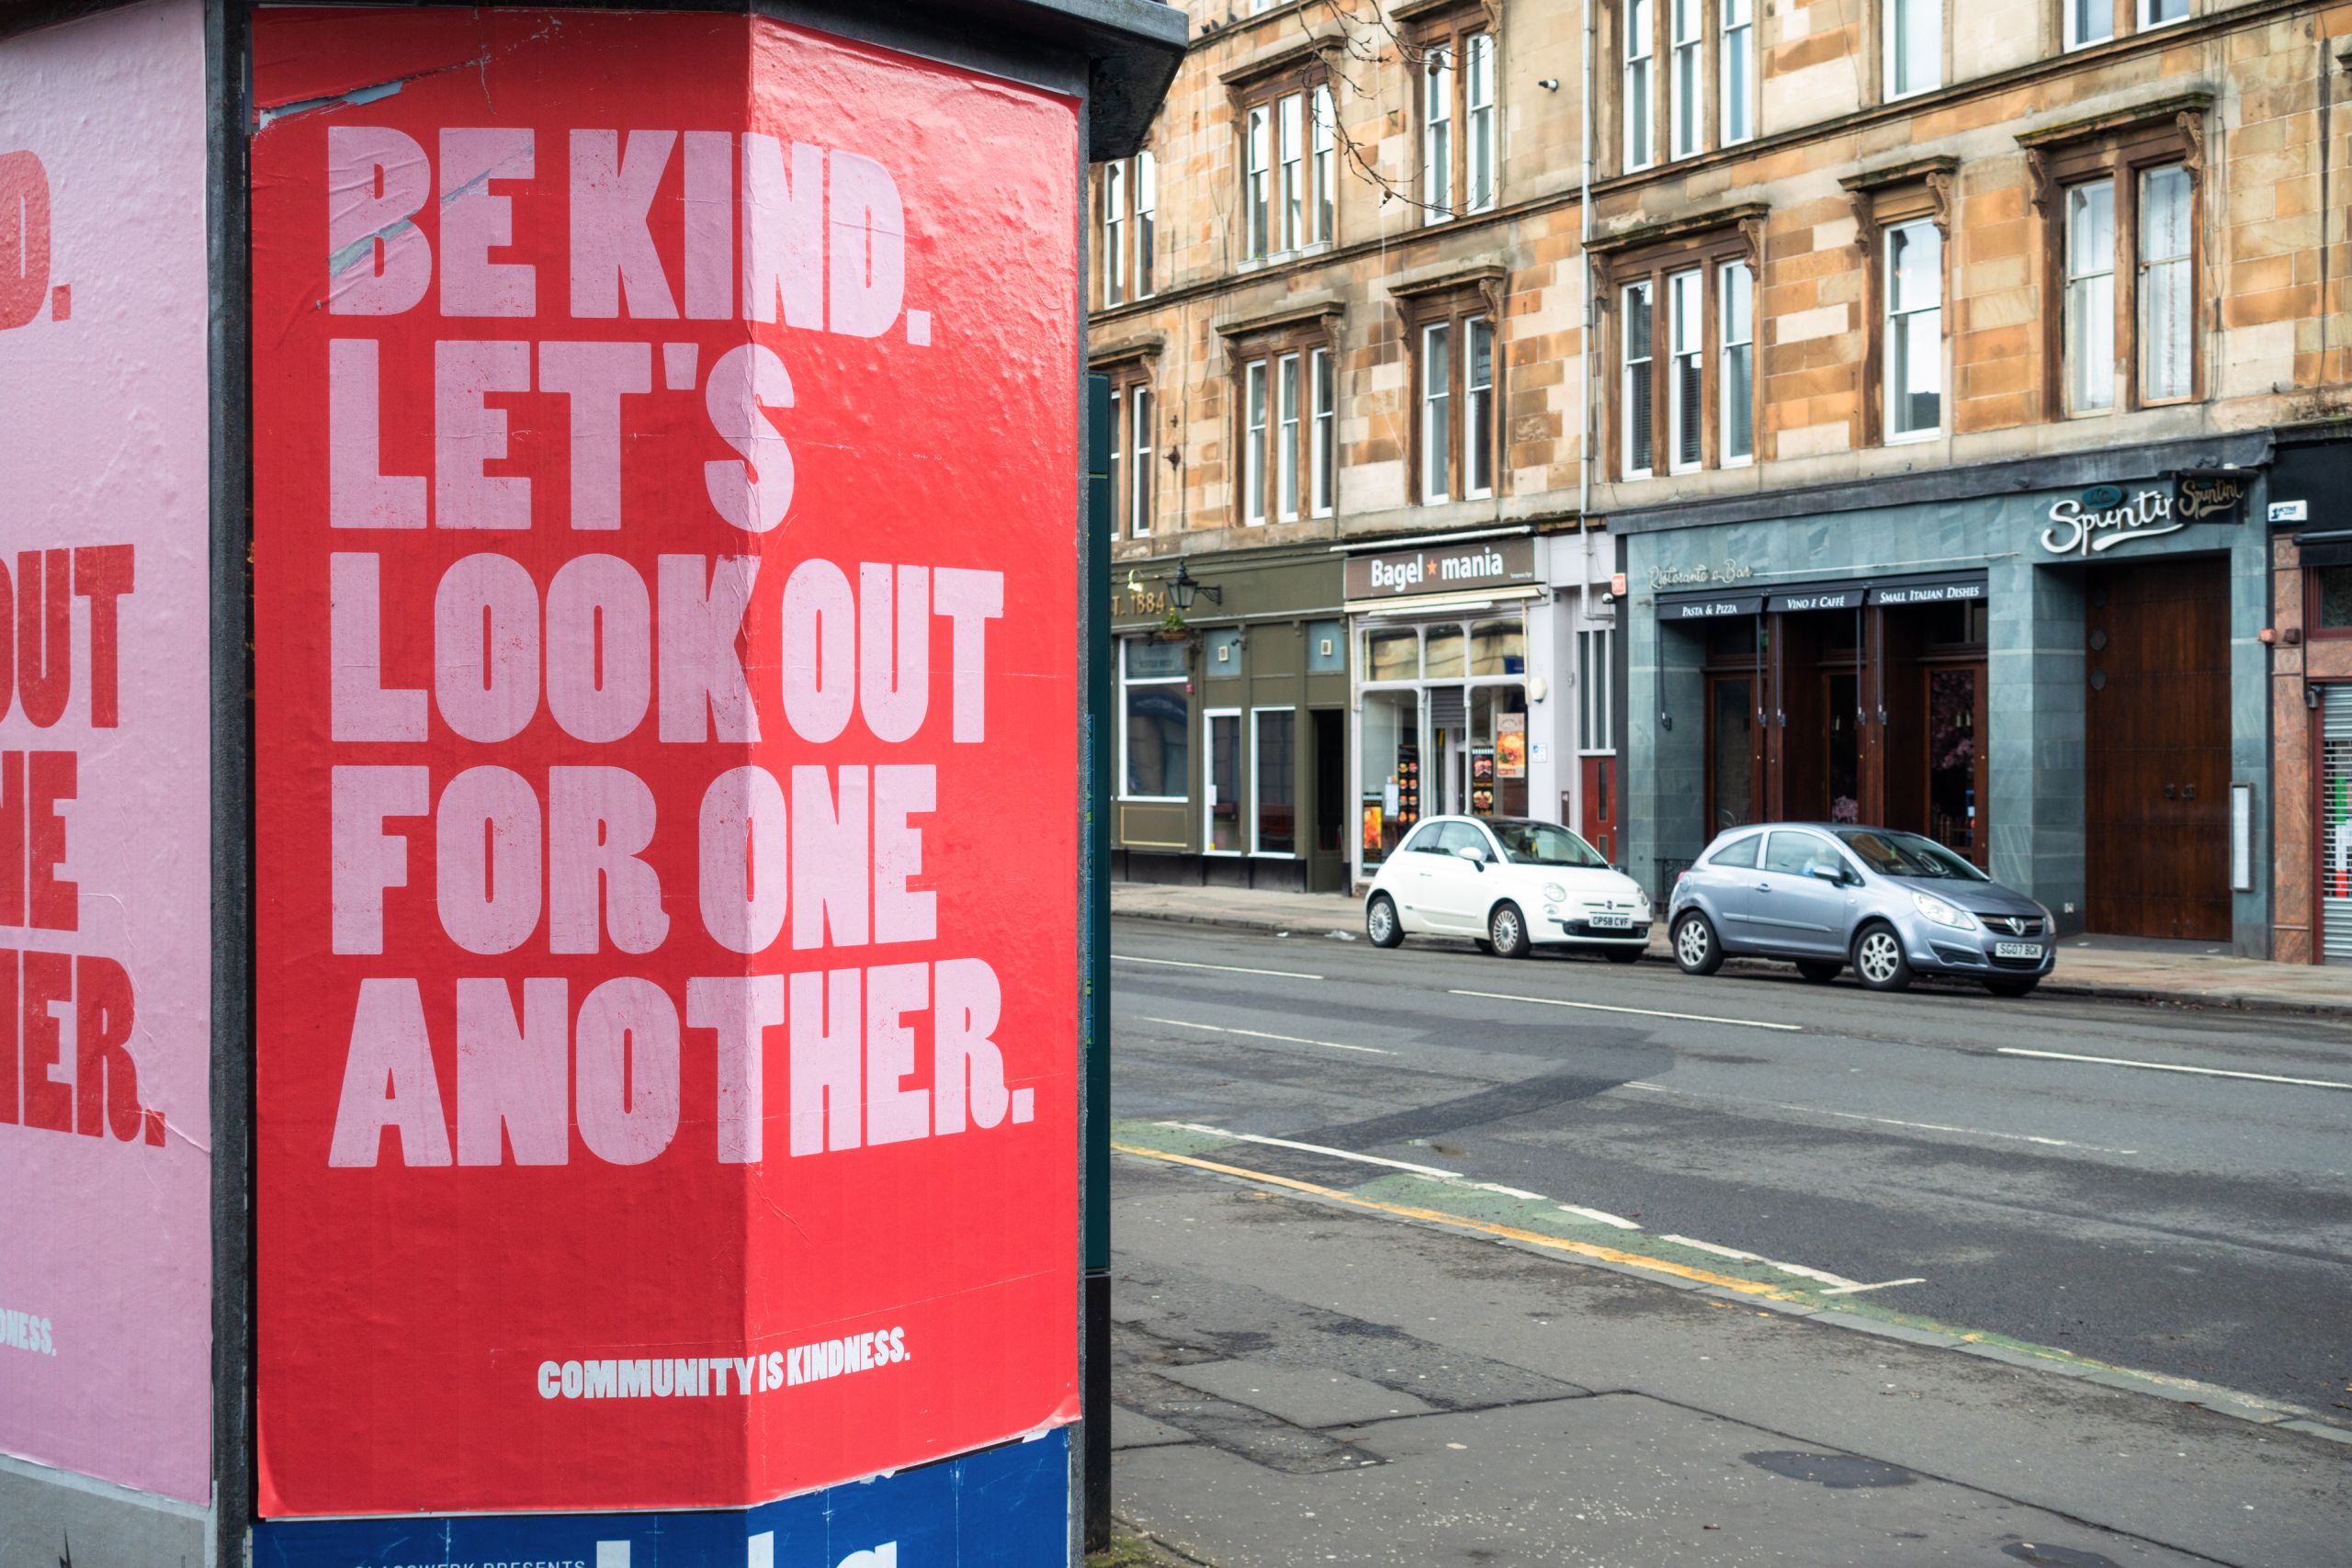 Image of buildings on a road with a sign that reads 'Be kind, let's look out for one another'